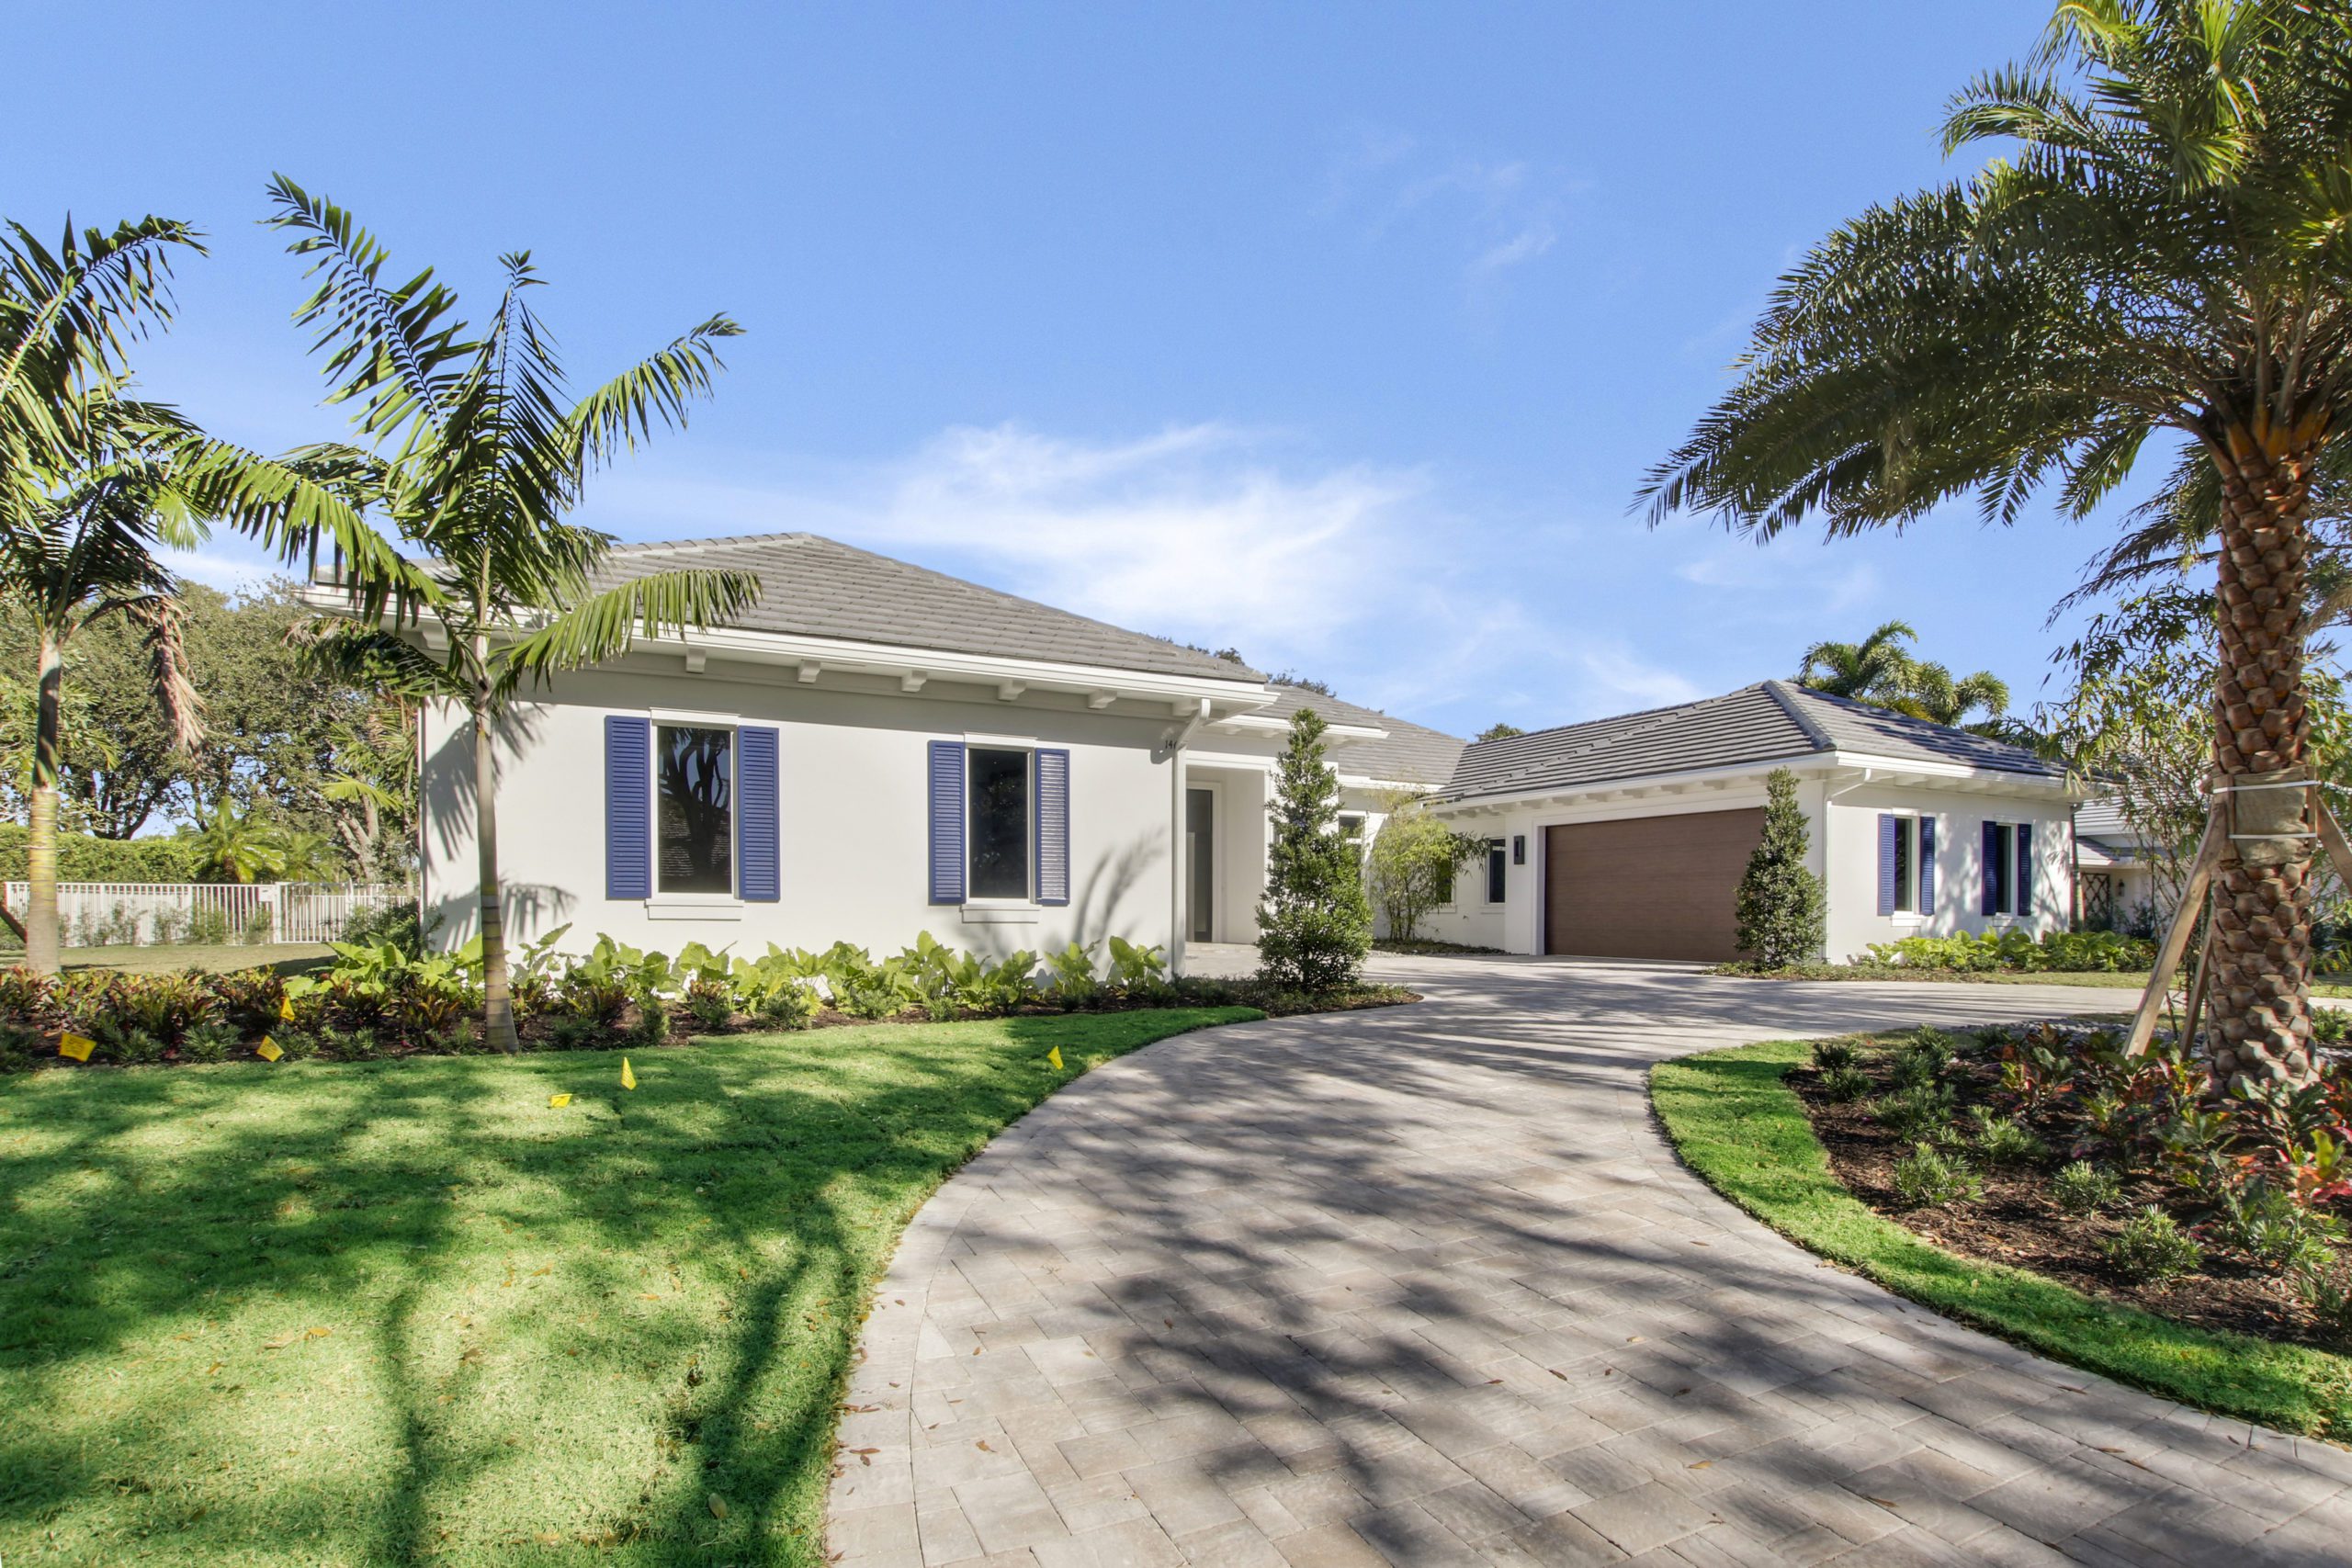 Opportunity in the Fort Lauderdale Luxury Real Estate Market This Year